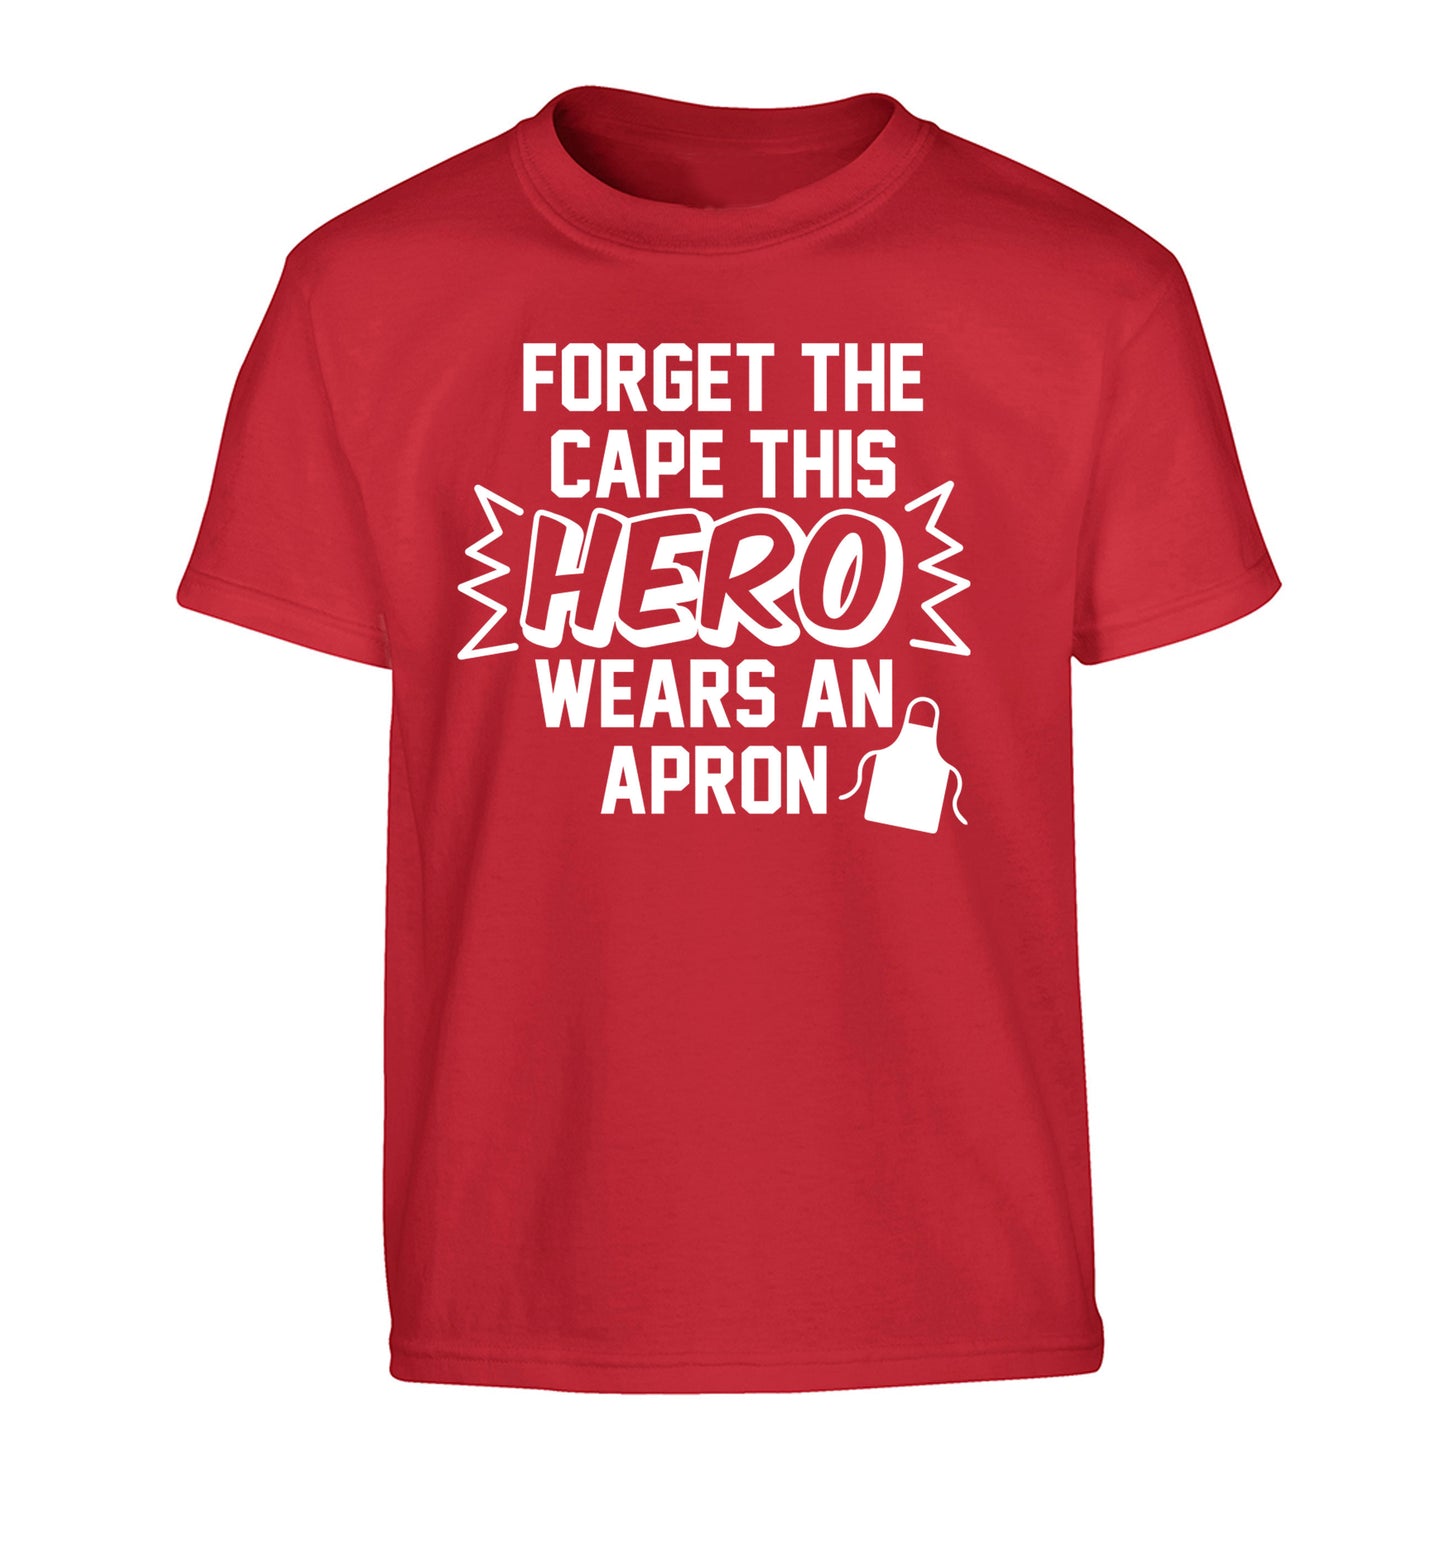 Forget the cape this hero wears an apron Children's red Tshirt 12-14 Years